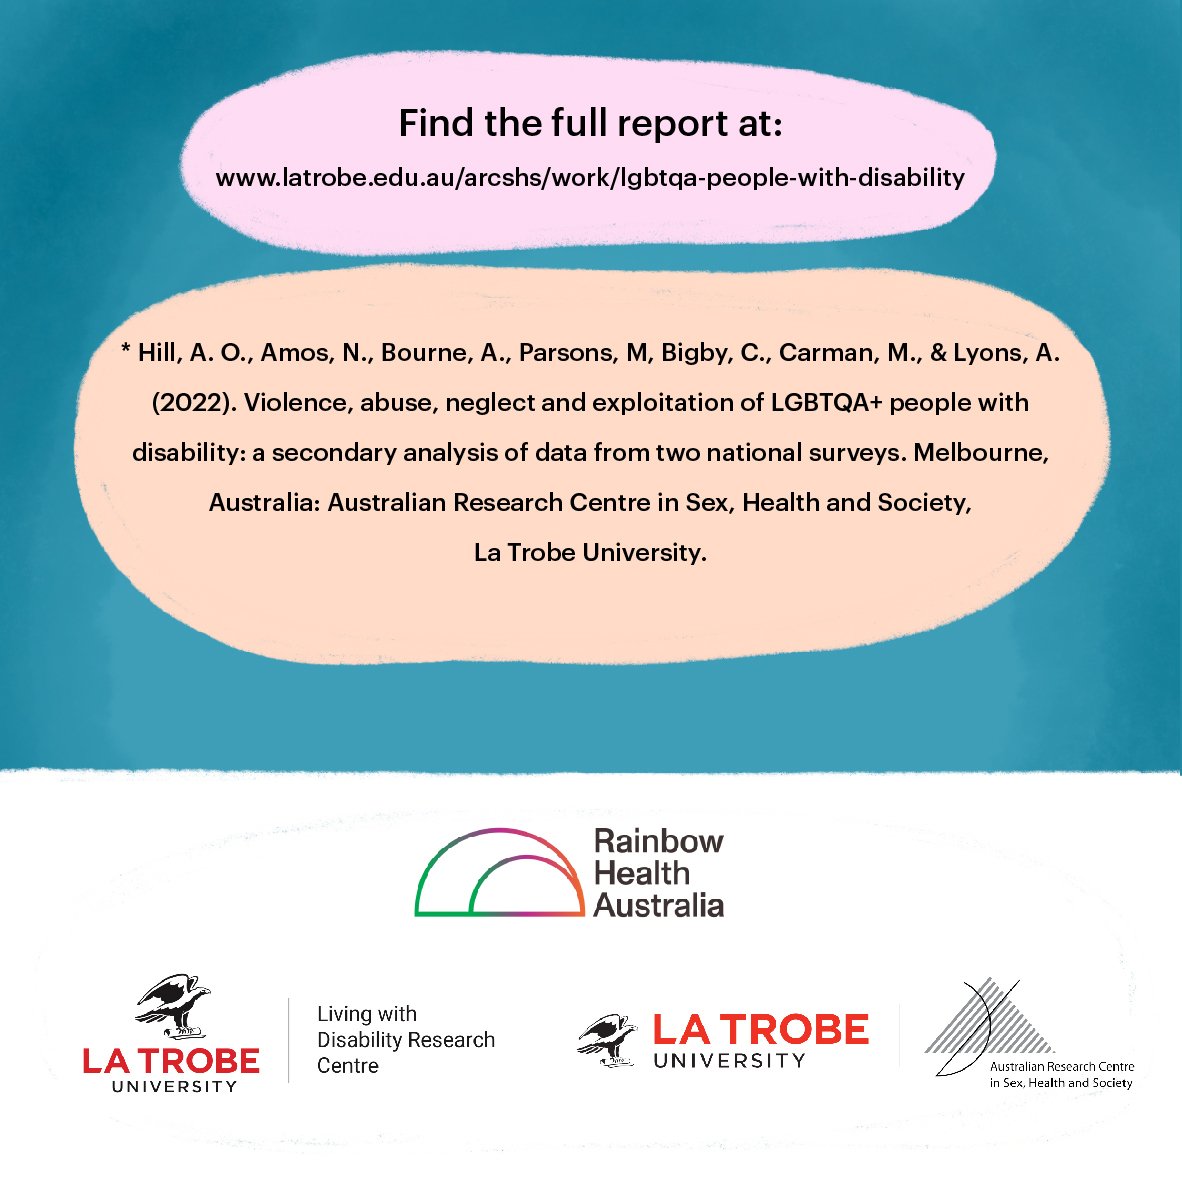 Link to full report website https://www.latrobe.edu.au/arcshs/work/lgbtqa-people-with-disability. Report citation. Logos of
Rainbow Health Australia, Australian Research Centre in Sex Health and Society and Living with Disability Research Centre. 